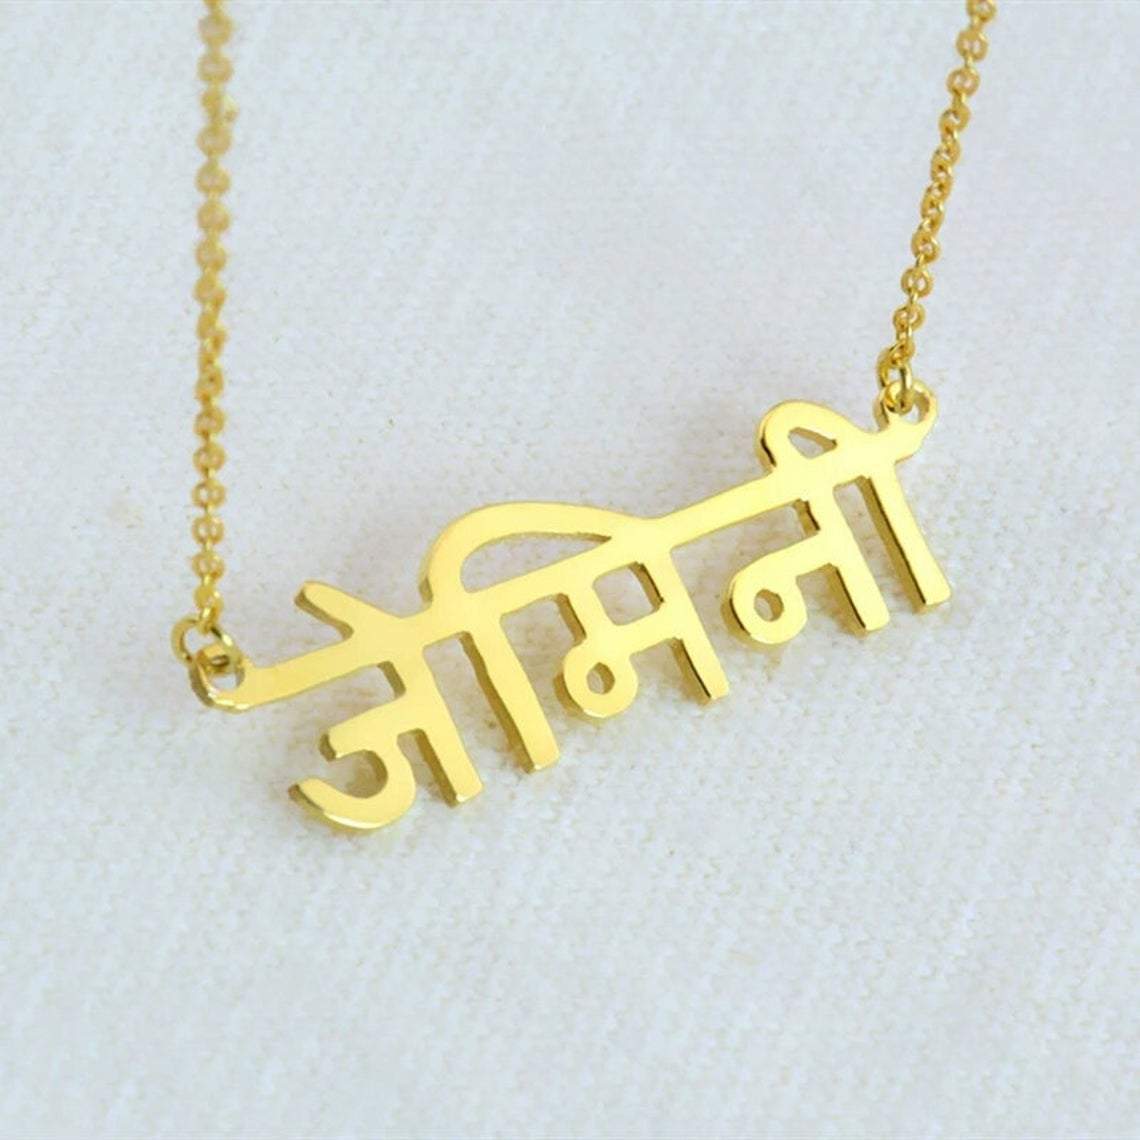 Personalized Hindi Name Plate Necklace